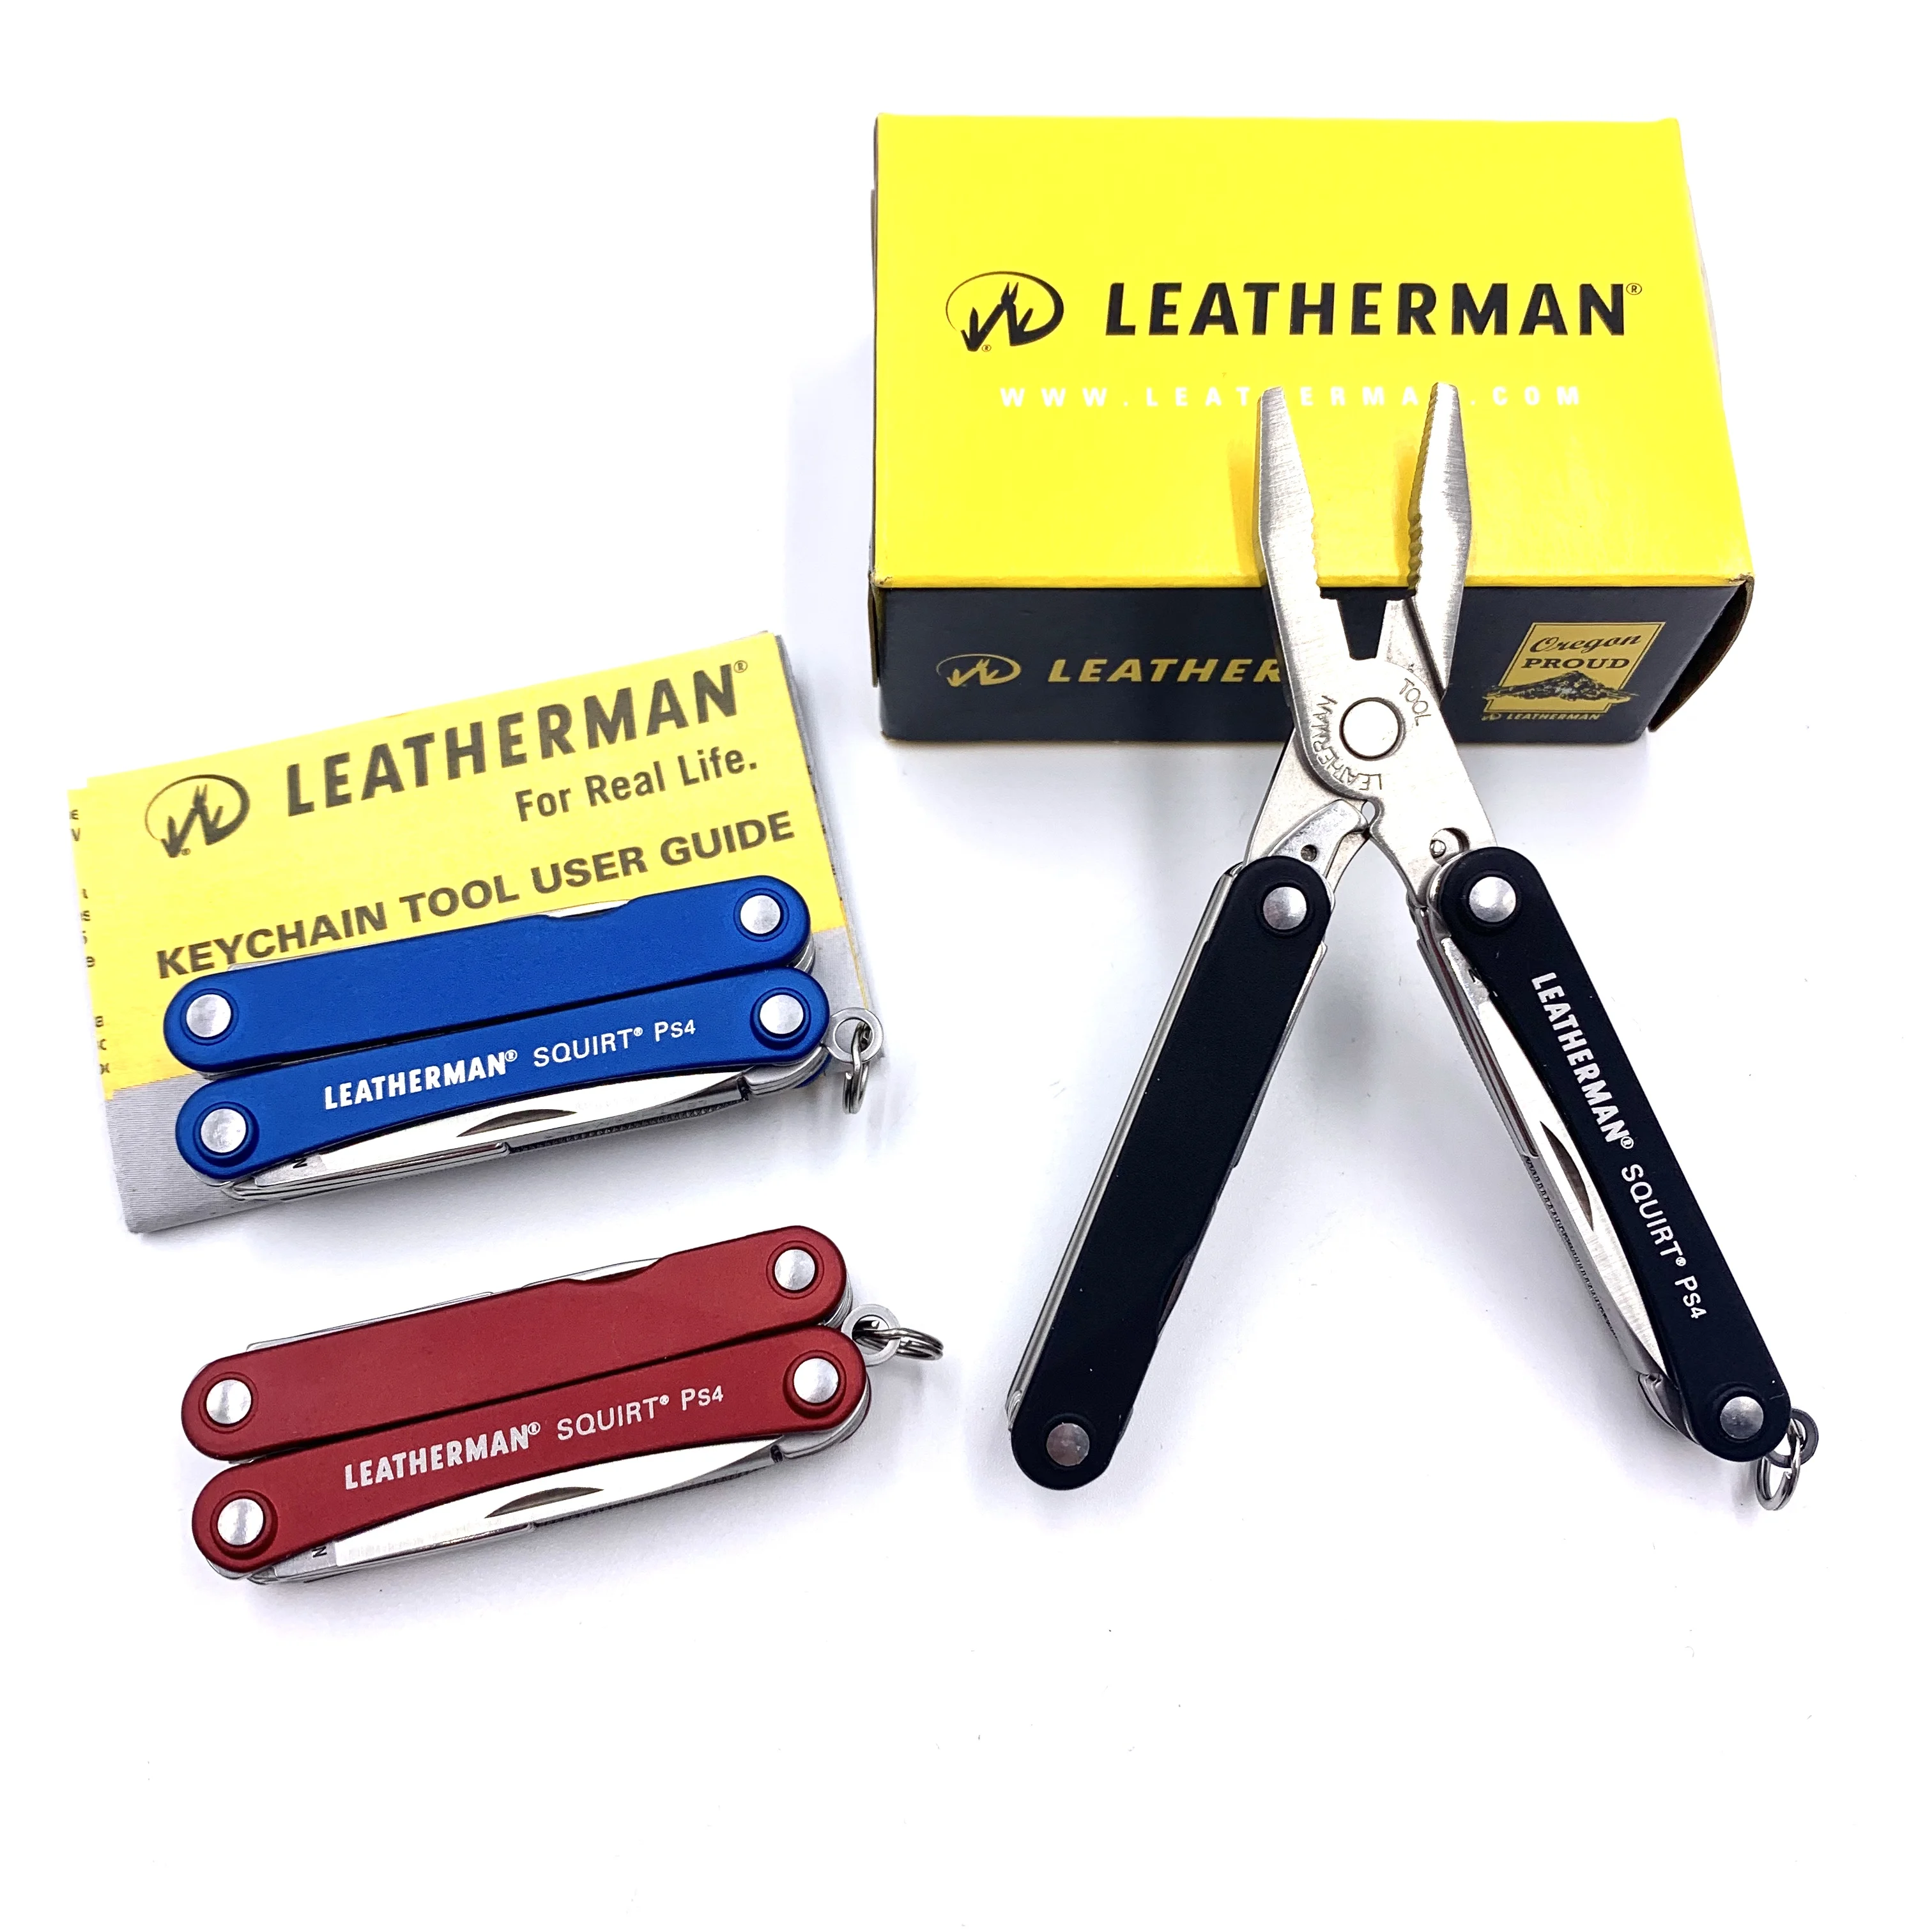 Leatherman squirt ps4 ouvre boite